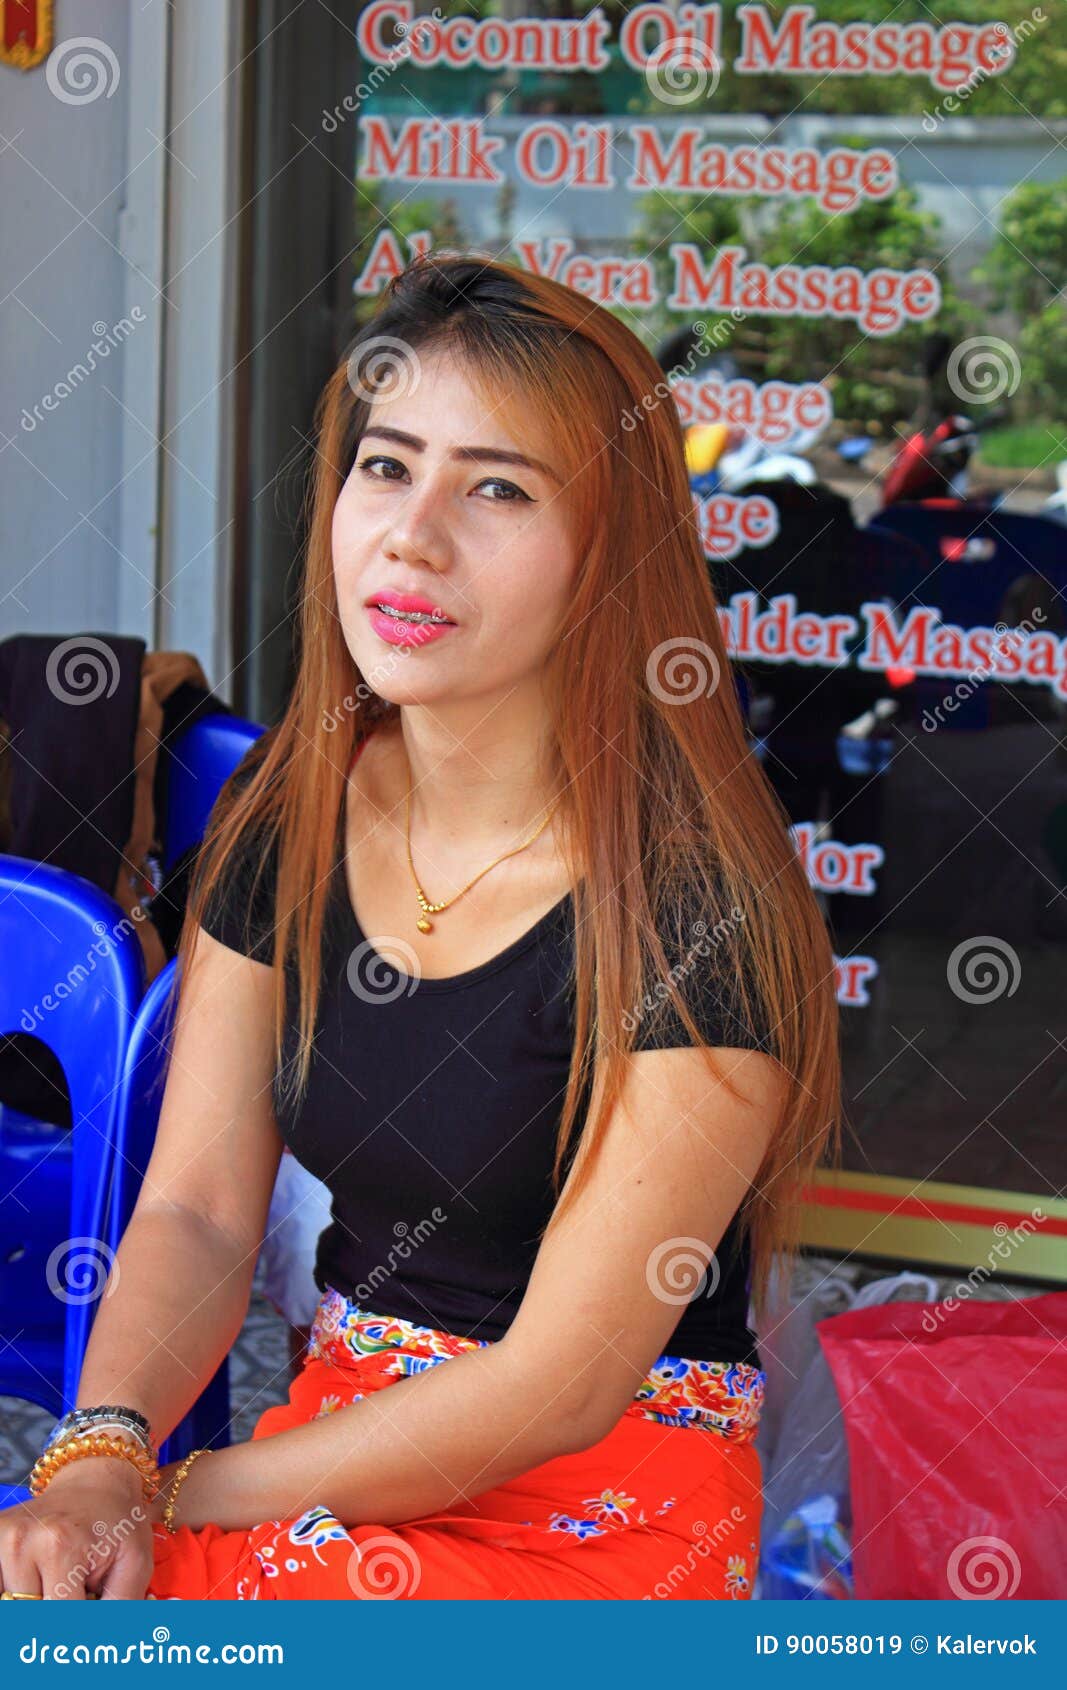 Massage Girl Thailand Editorial Stock Image Image Of Cultural 90058019